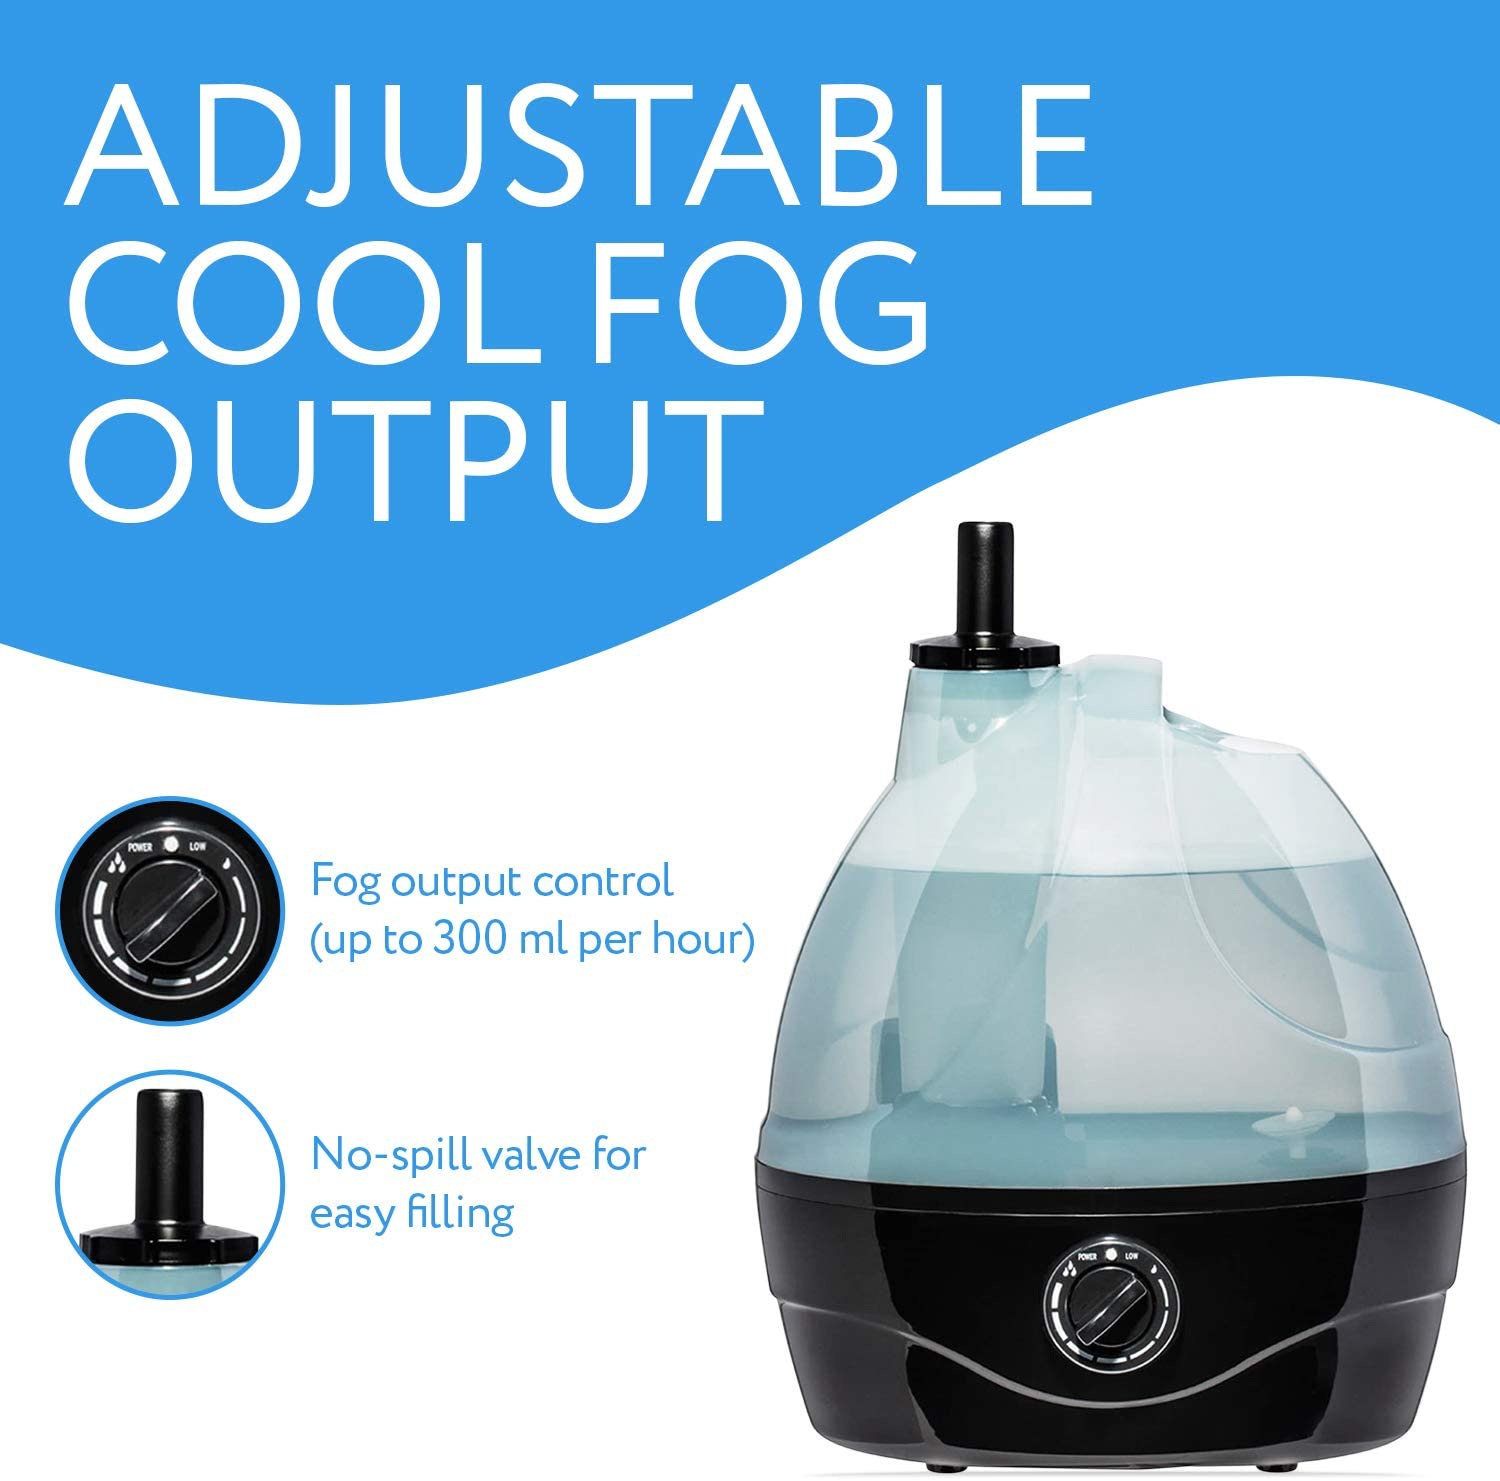 Reptile Humidifier / Fogger - Large Tank - Ideal for a Variety of Reptiles / Amphibians / Herps - Compatible with All Terrariums and Enclosures - by Evergreen Pet Supplies